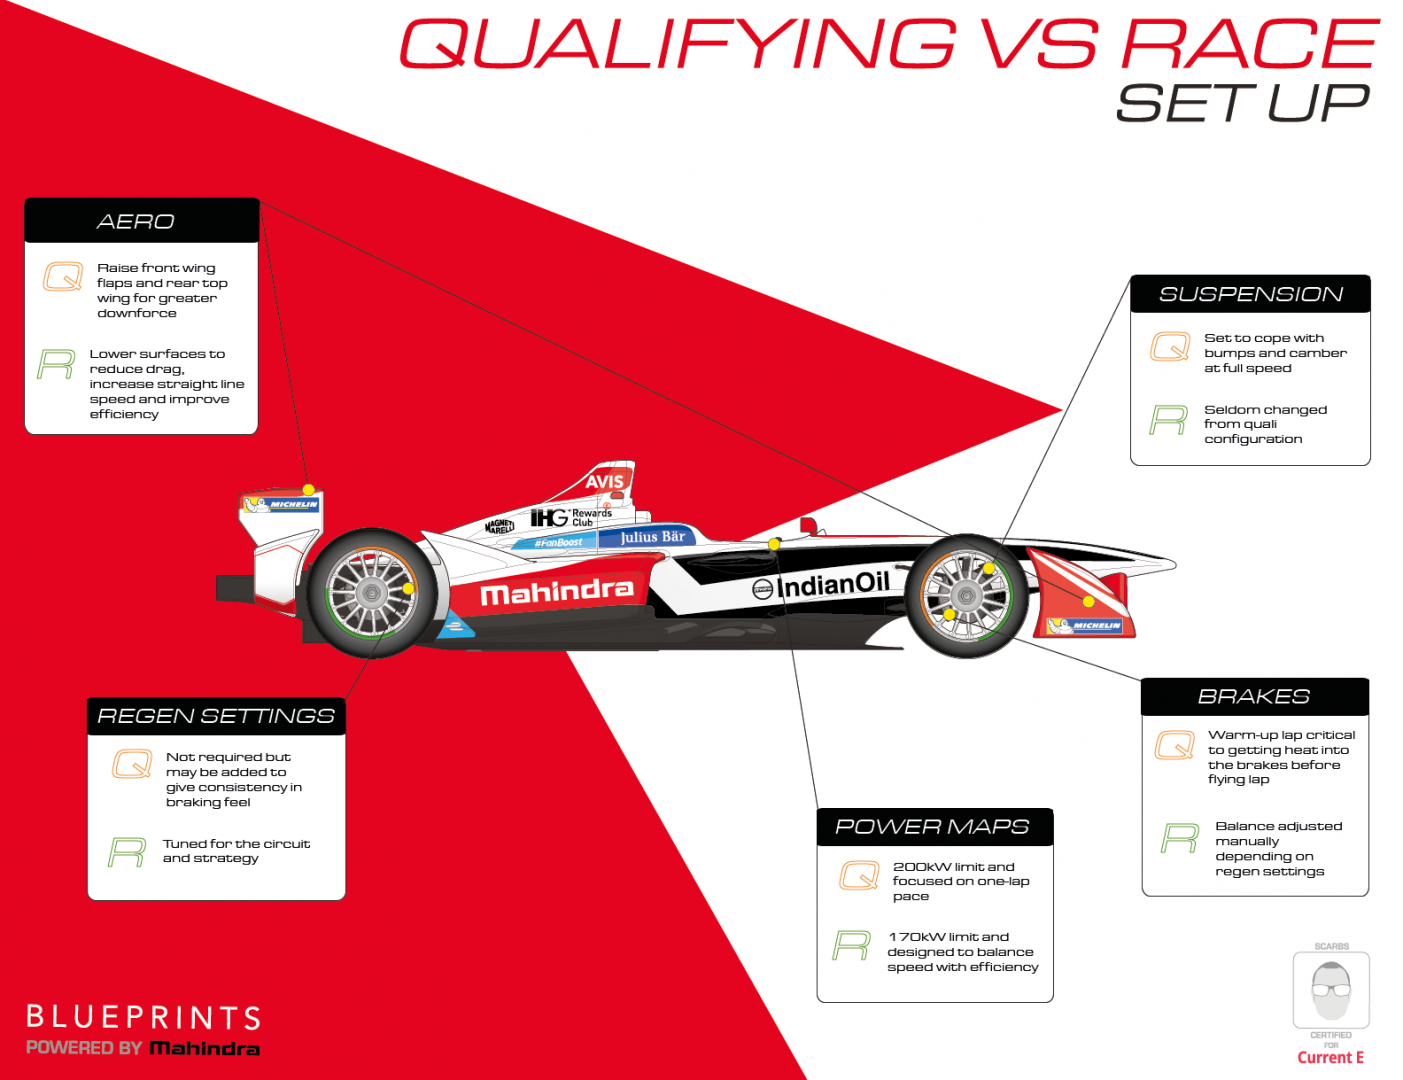 Mahindra Racing's introduces new ways to involve fans in Formula E